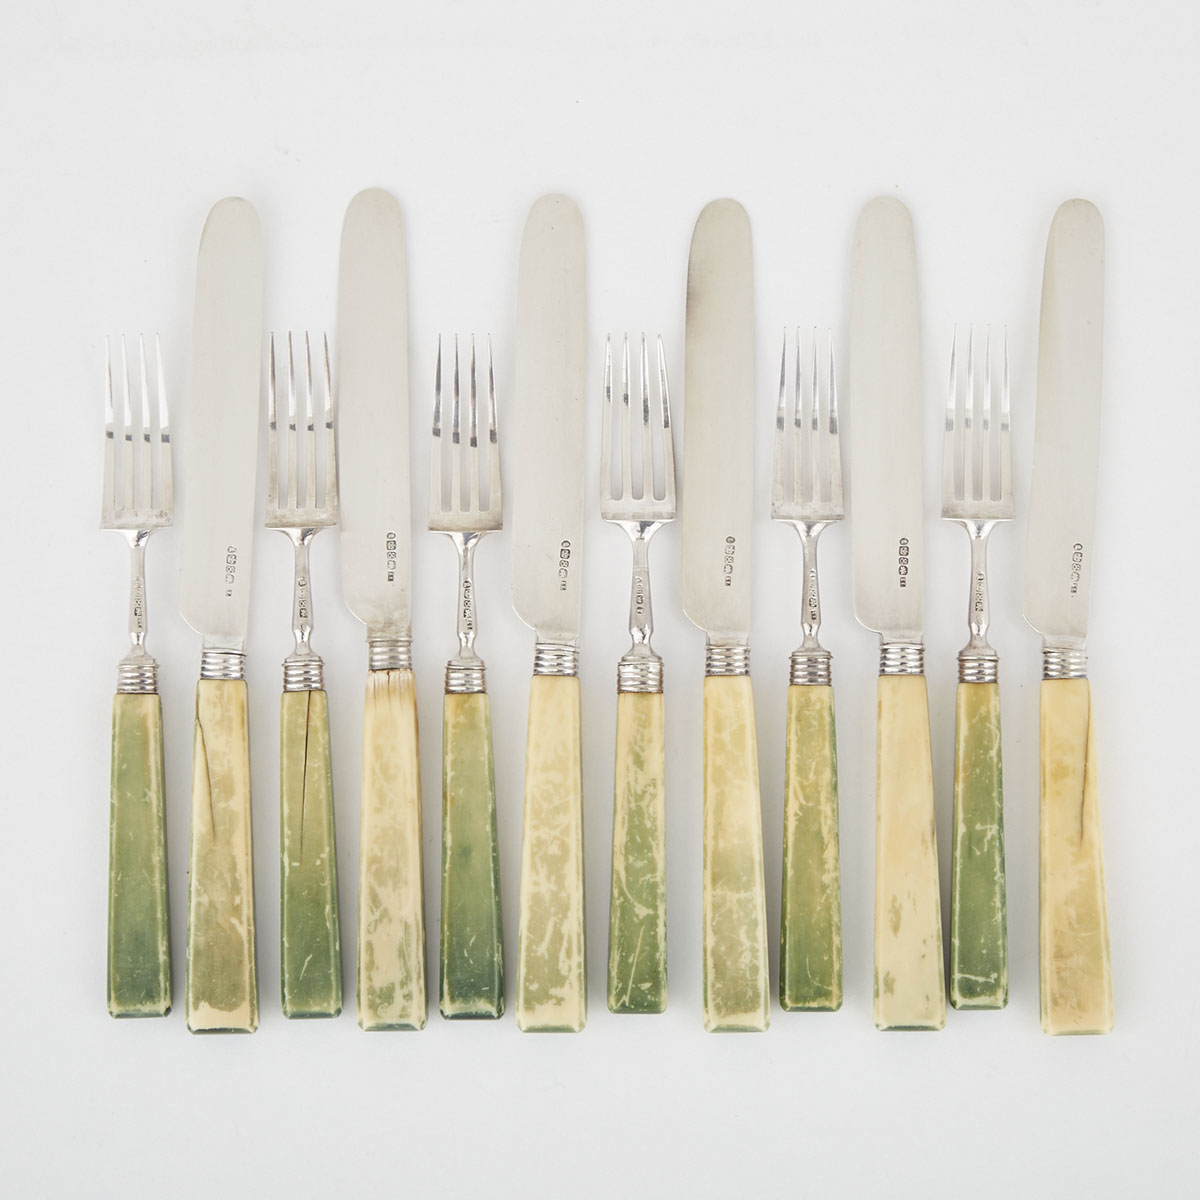 Six William IV Silver Dessert Knives and Six Forks, Joseph Law, Sheffield, 1830